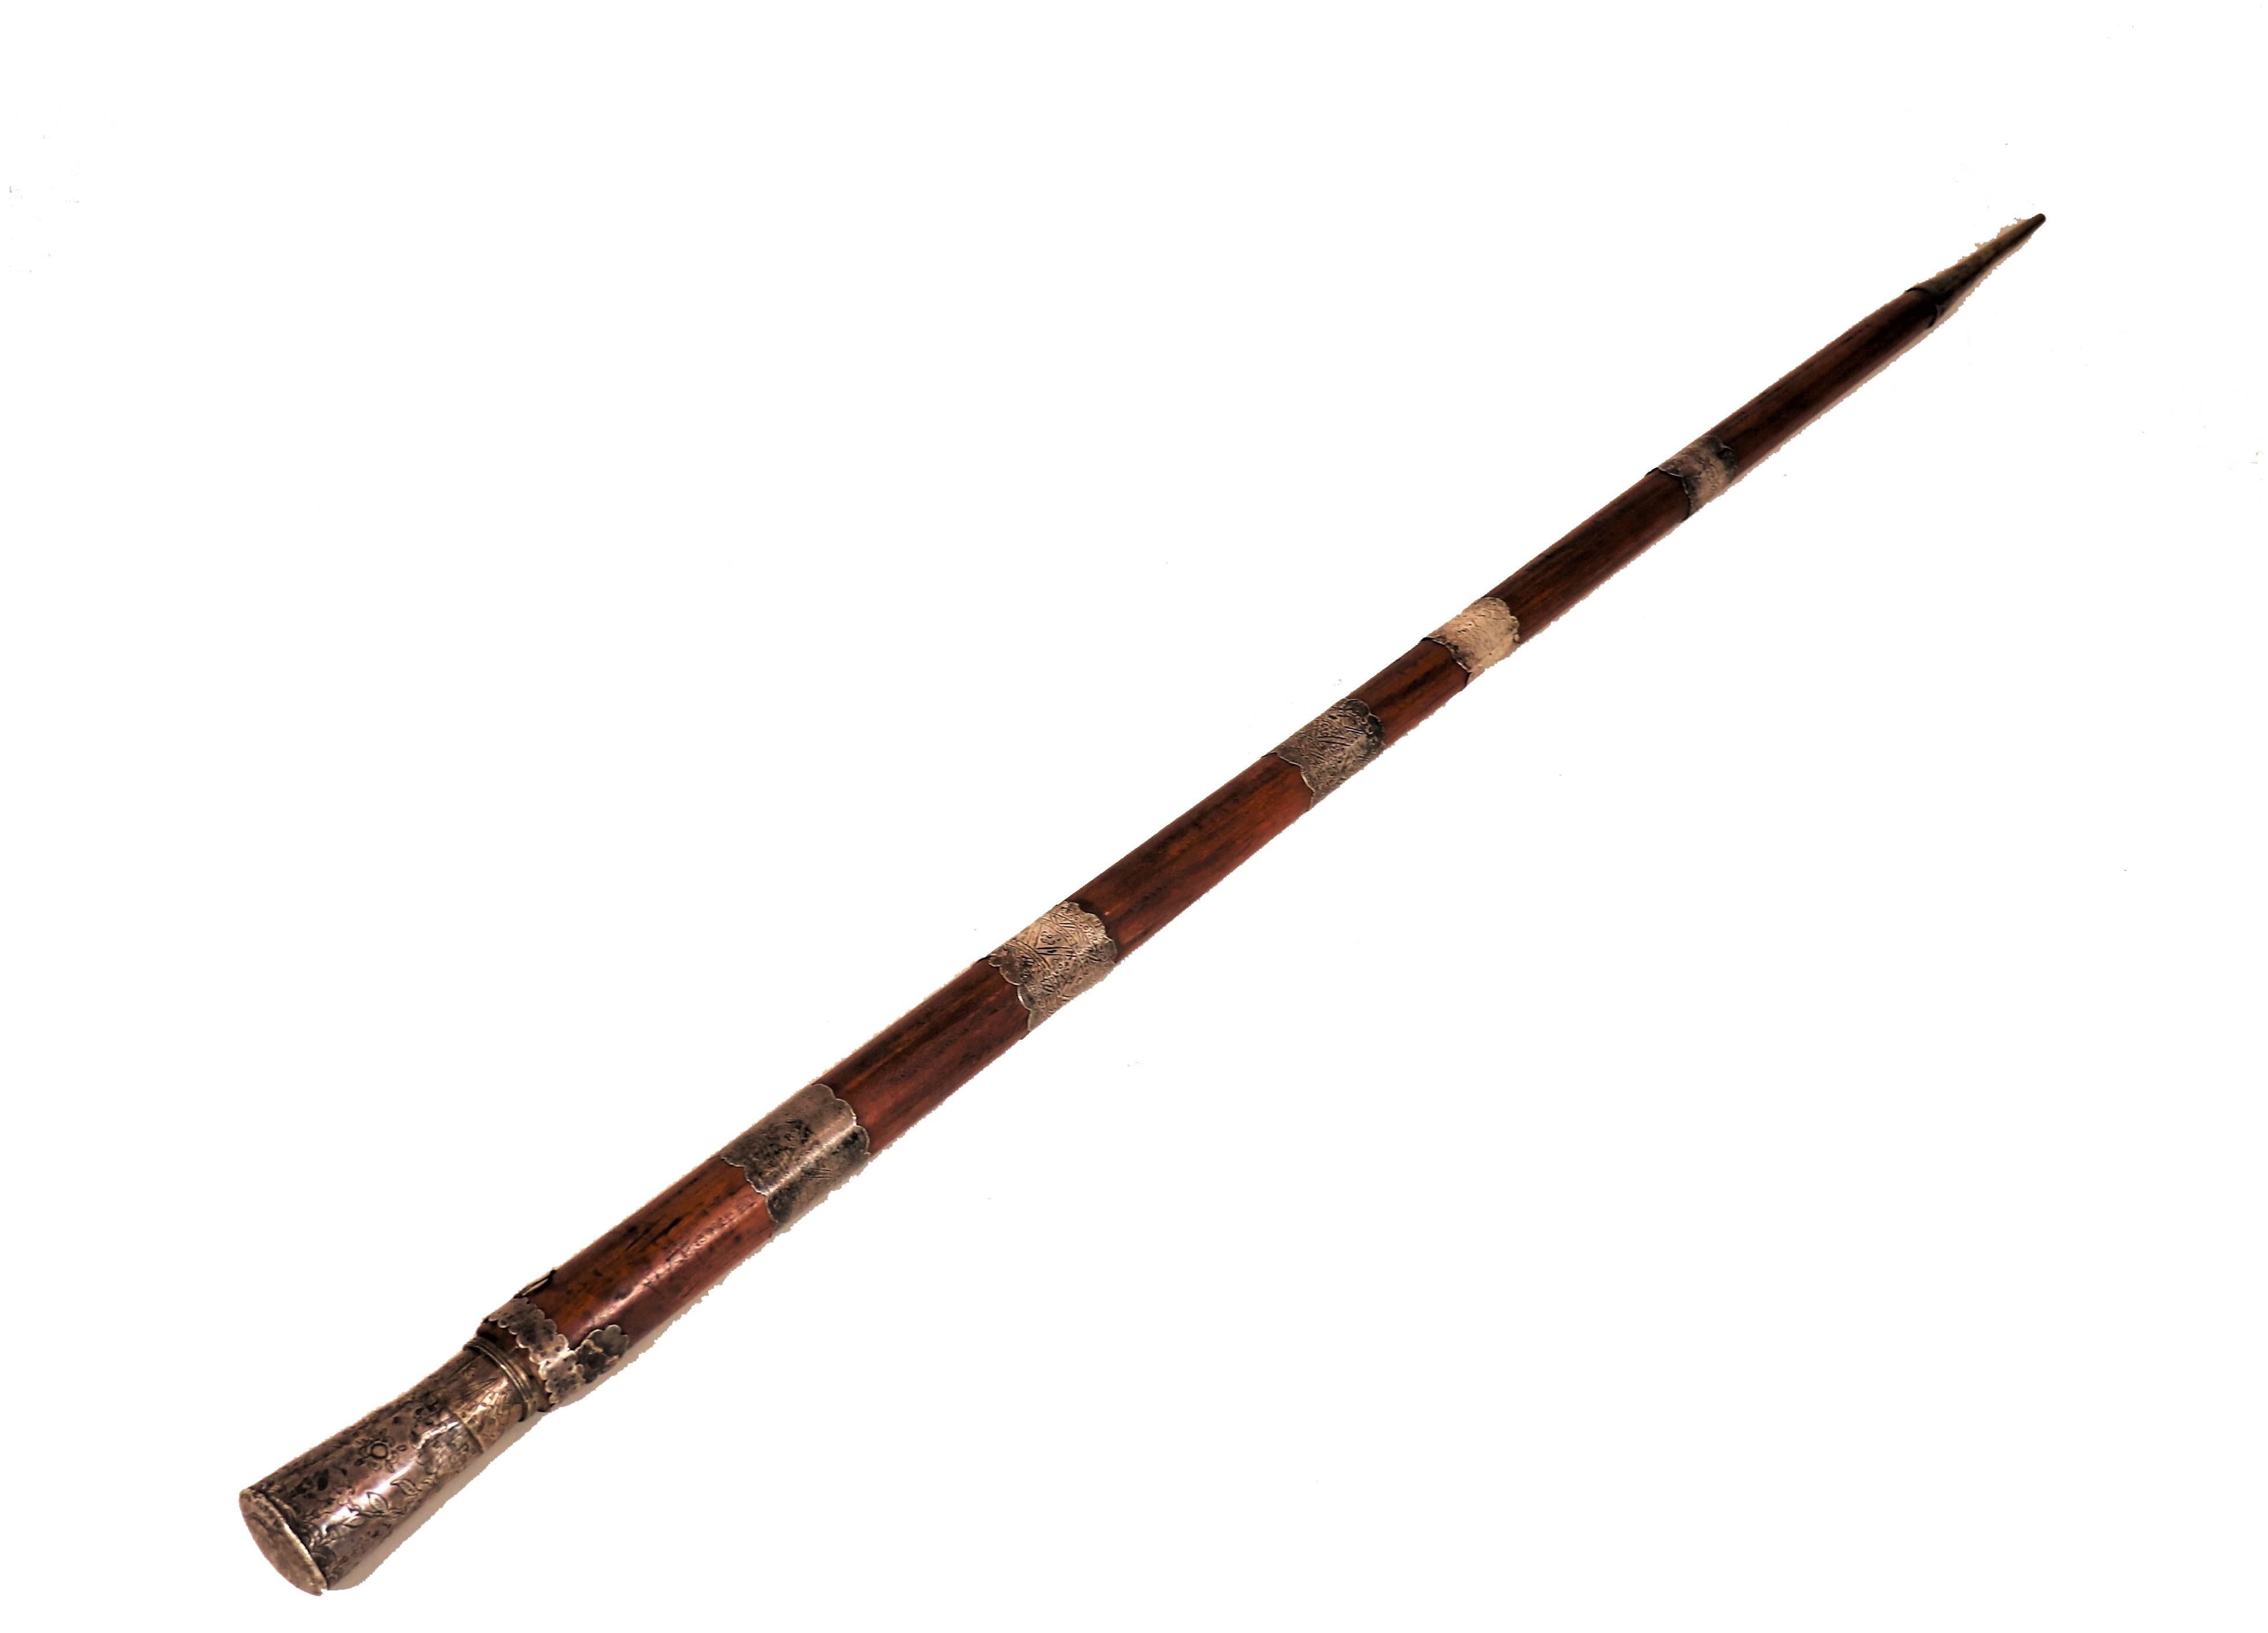 This one-of-a-kind Austrian hiking staff has been handcrafted from solid oak. Oak is a relatively lightweight yet sturdy material, which lends itself perfectly as a hiking staff. Many handmade staffs were created in Austria, due to its geographic